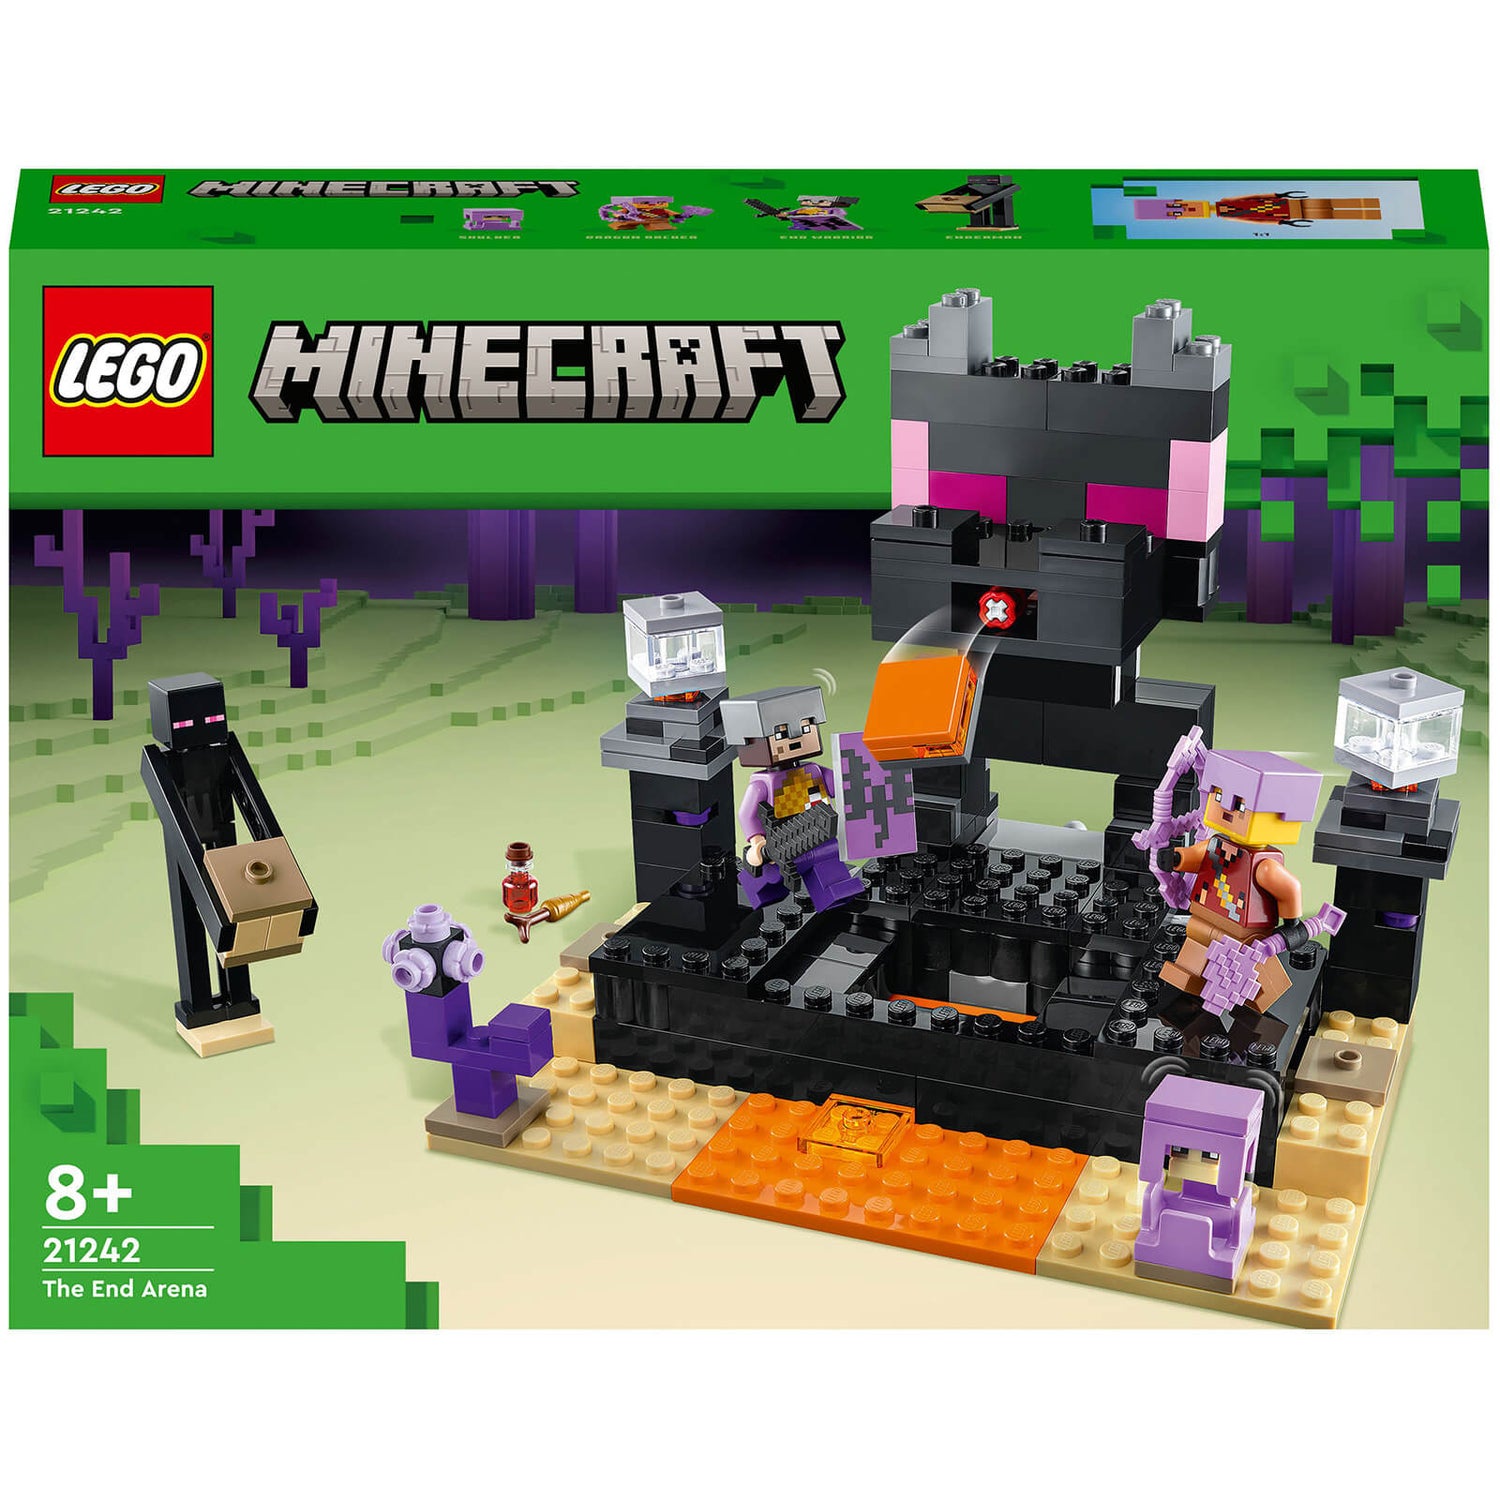 LEGO Minecraft The End Arena Building Set (21242)